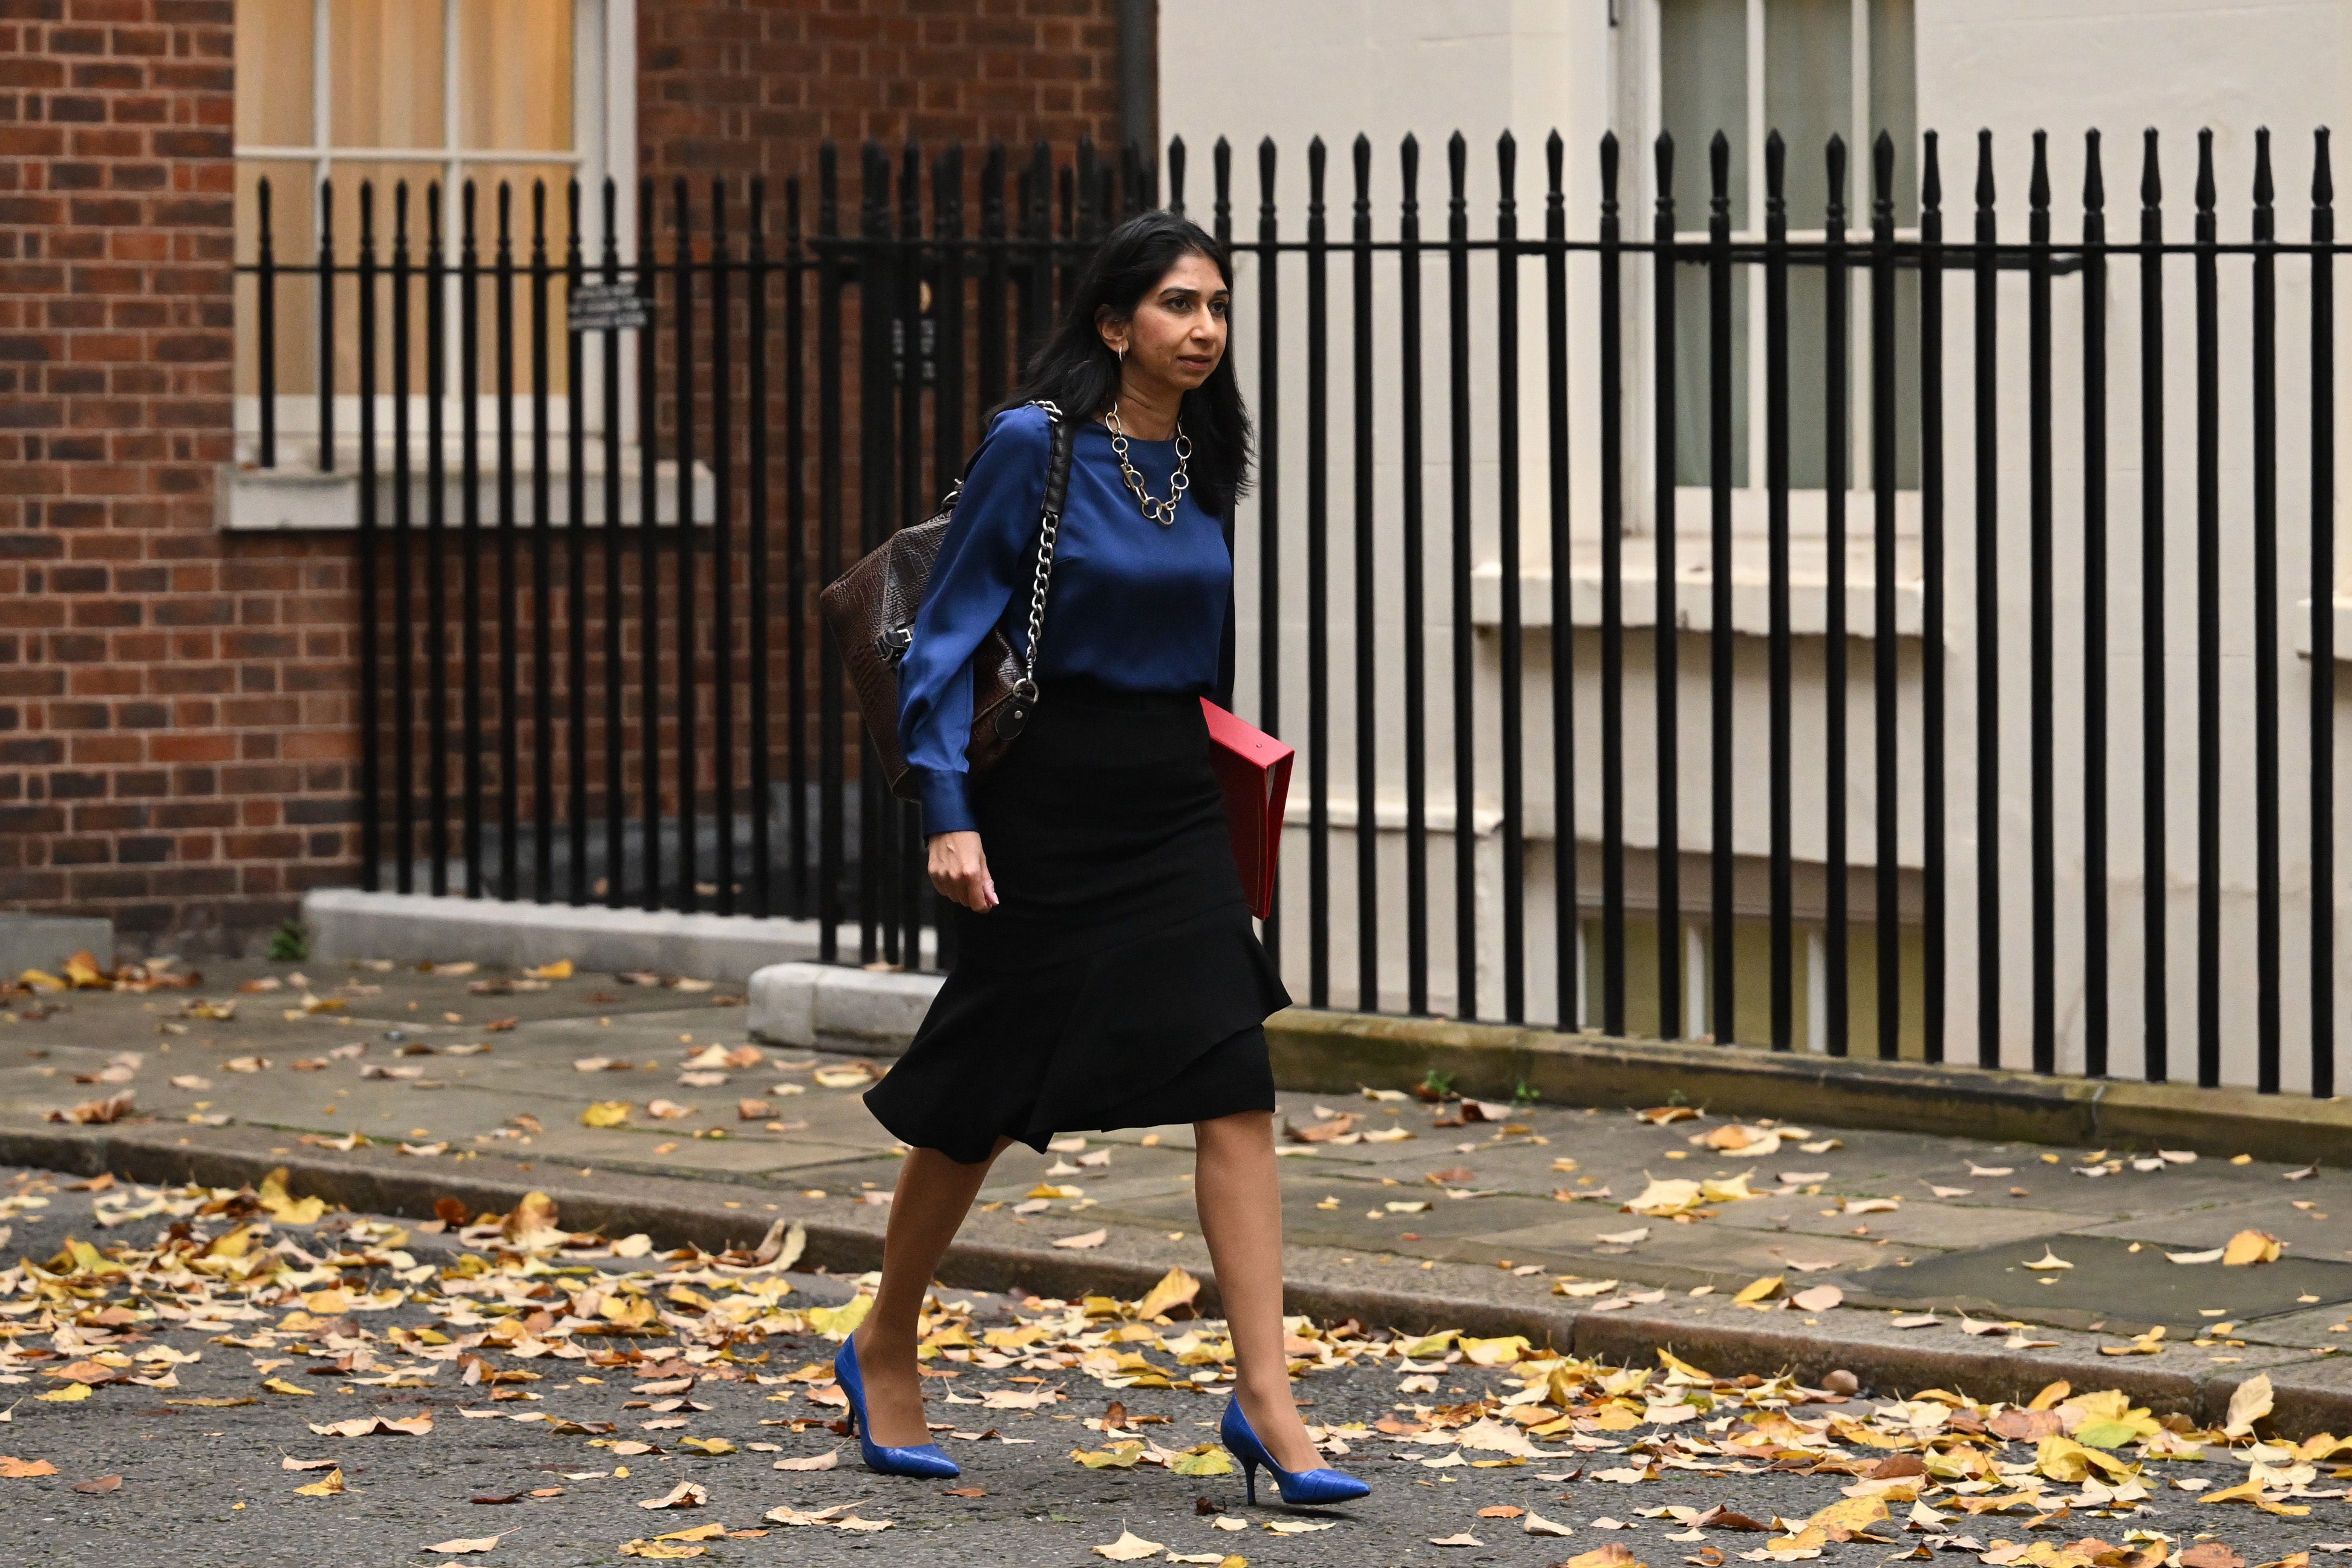 Suella Braverman, the home secretary, ought in her own interest to focus on making the asylum system work better rather than more punitively